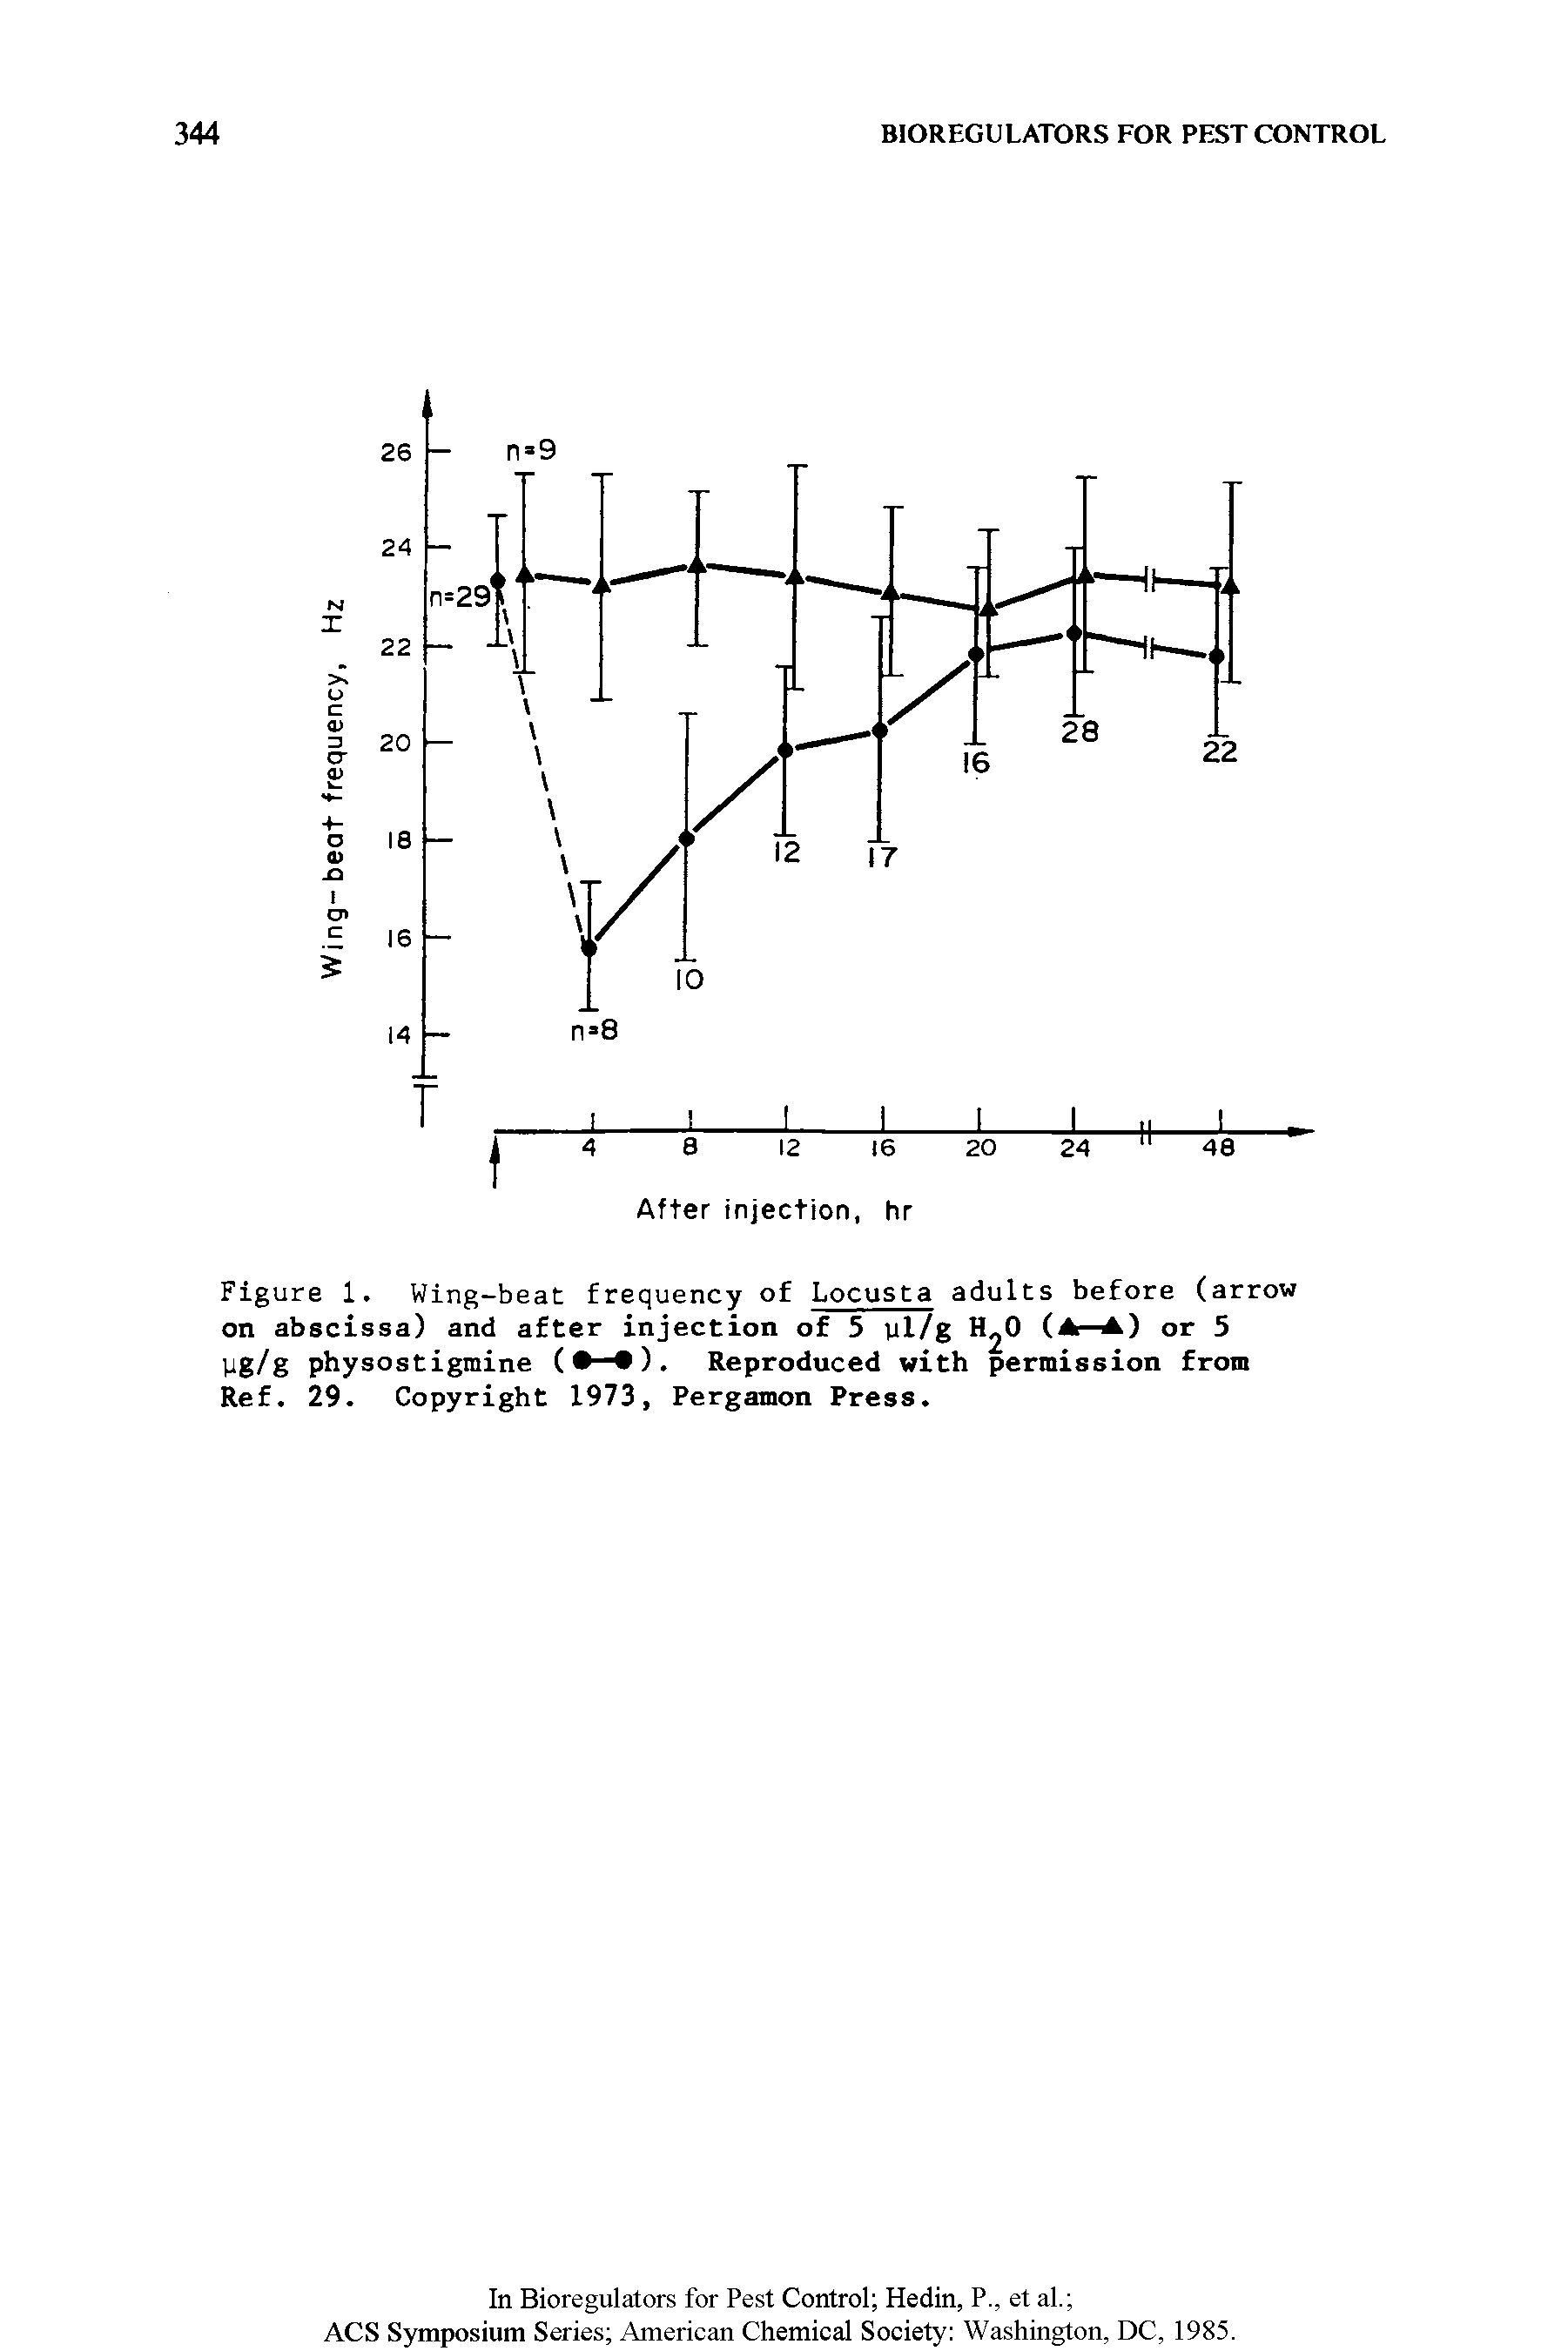 Figure 1. Wing-beat frequency of Locusta adults before (arrow on abscissa) and after injection of 5 ul/g H O (Ar-A) or 5 yg/g physostigmine ( — ). Reproduced with permission from Ref. 29. Copyright 1973, Pergamon Press.